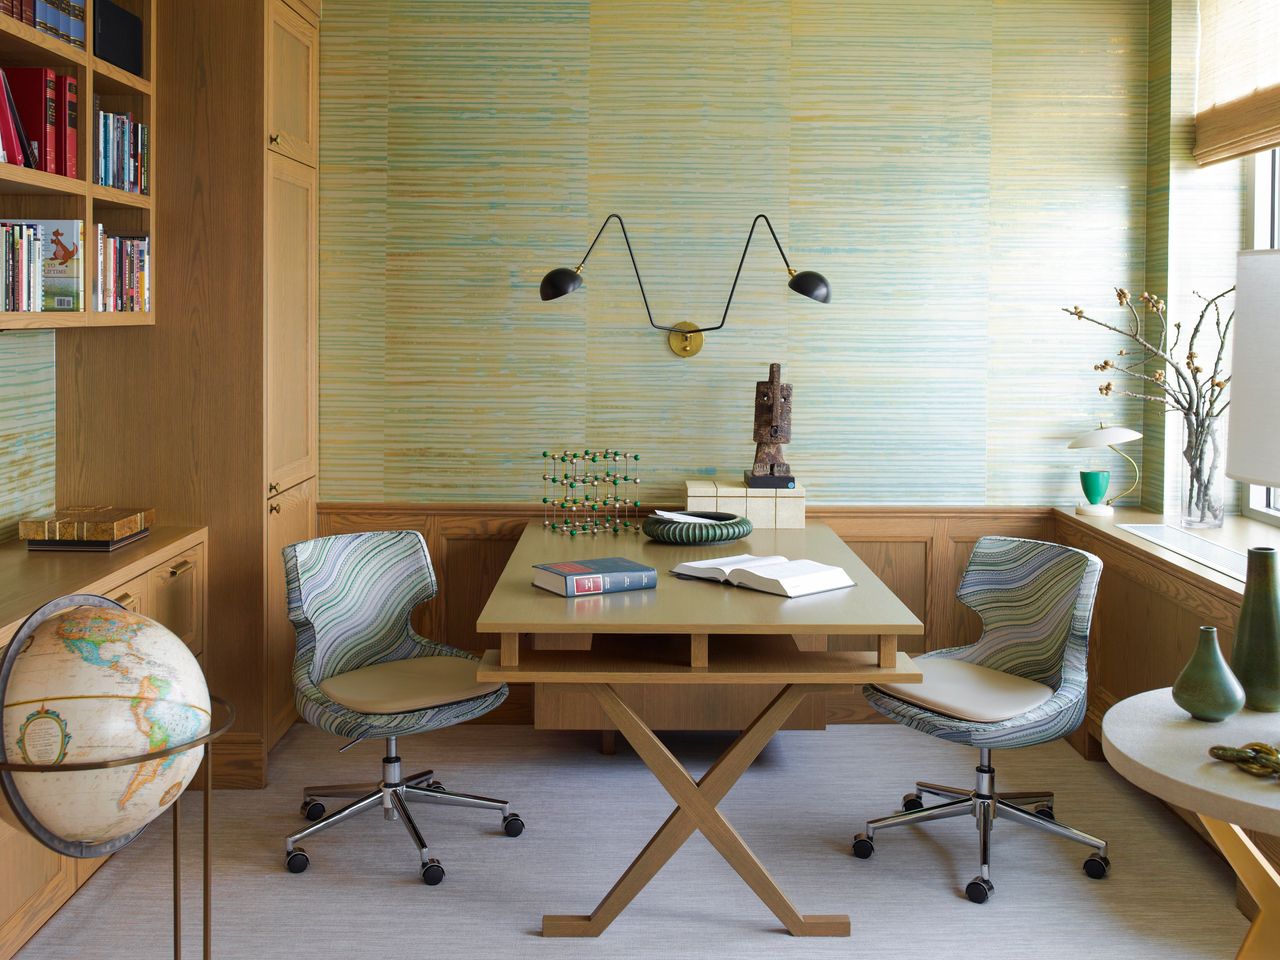 The 7 Design Mistakes To Avoid In A Small Home Office